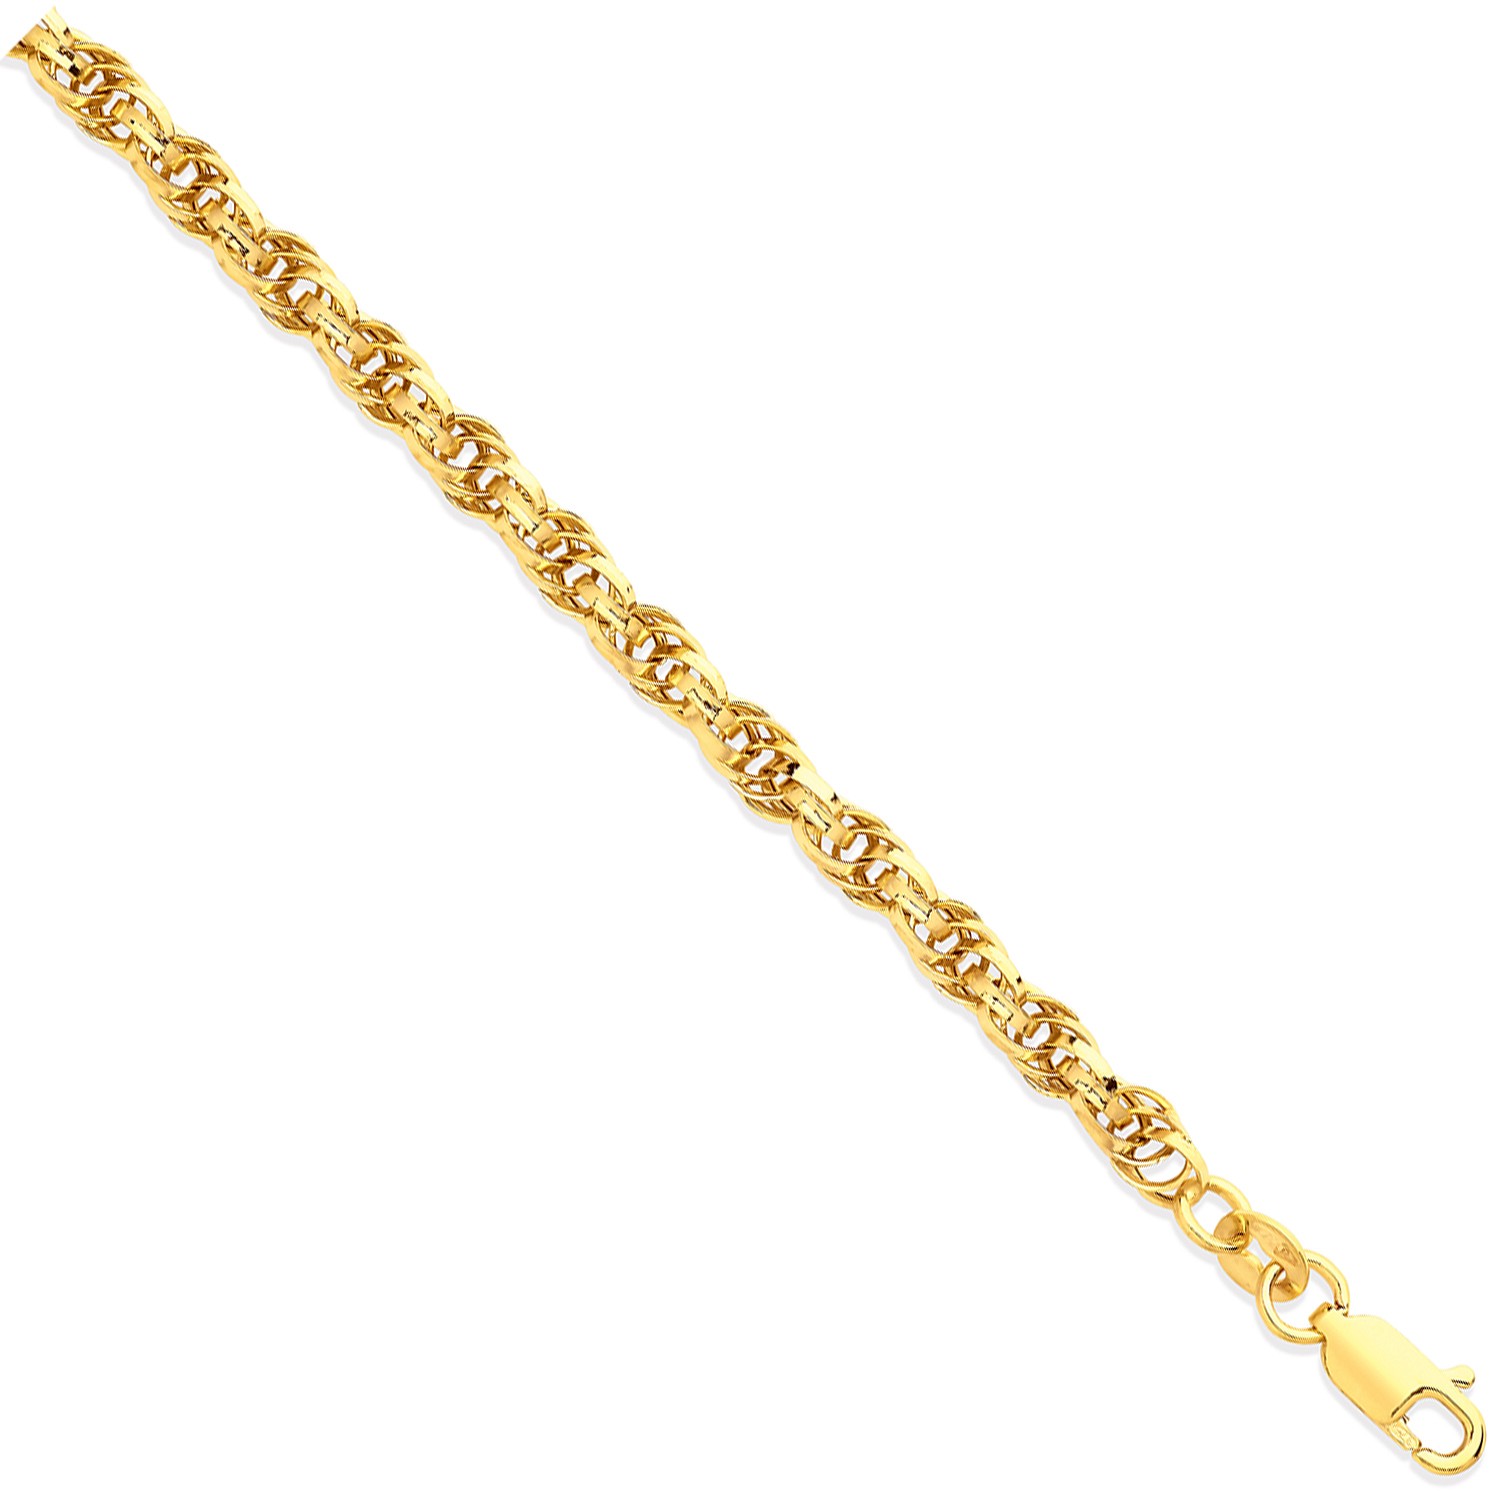 Y/G 3.7mm Hollow Prince of Wales Chain